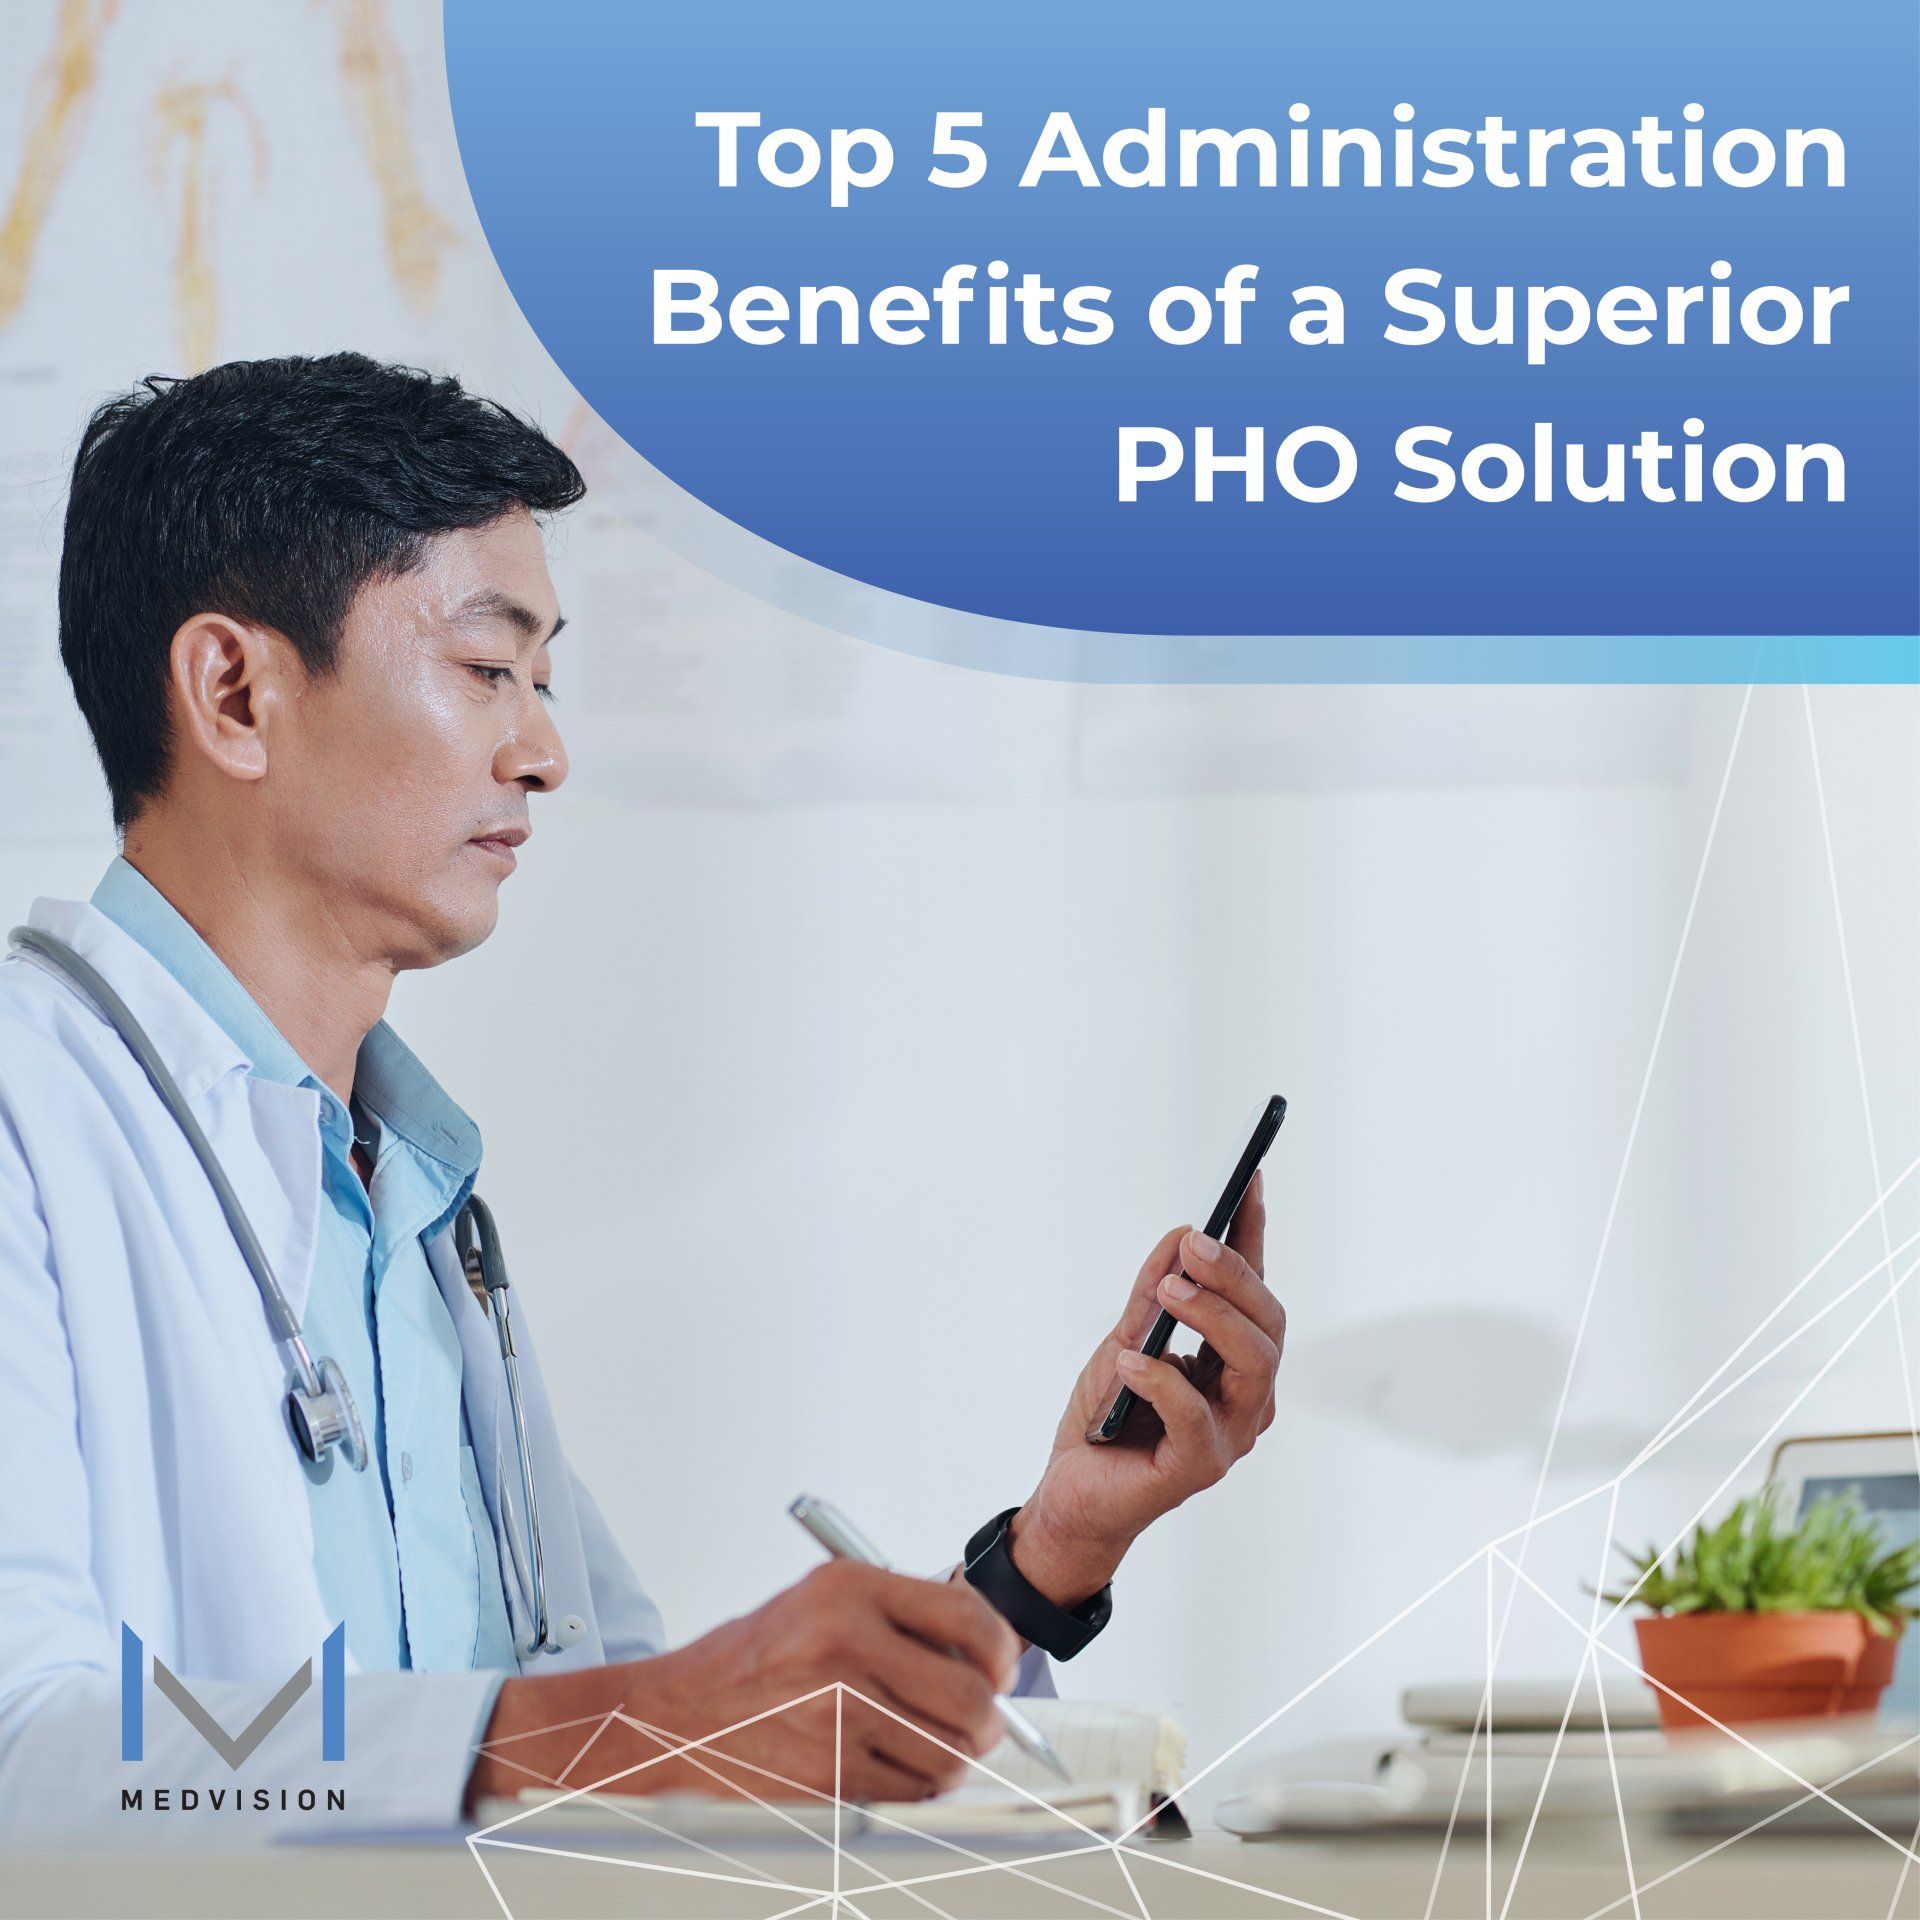 Top 5 Administration Benefits of a Superior PHO Solution